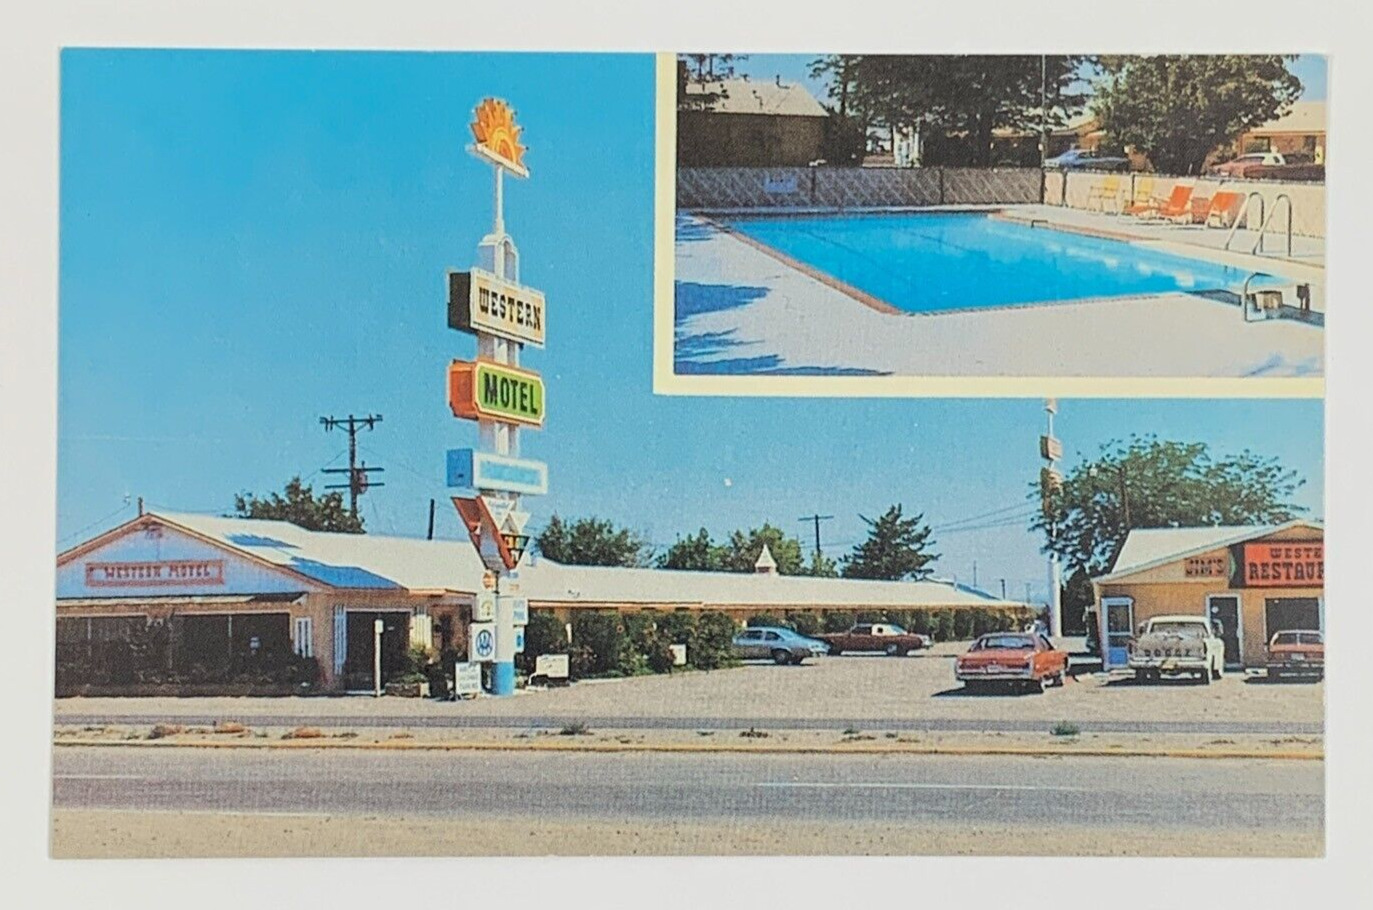 Western Motel Deming New Mexico Postcard Unposted